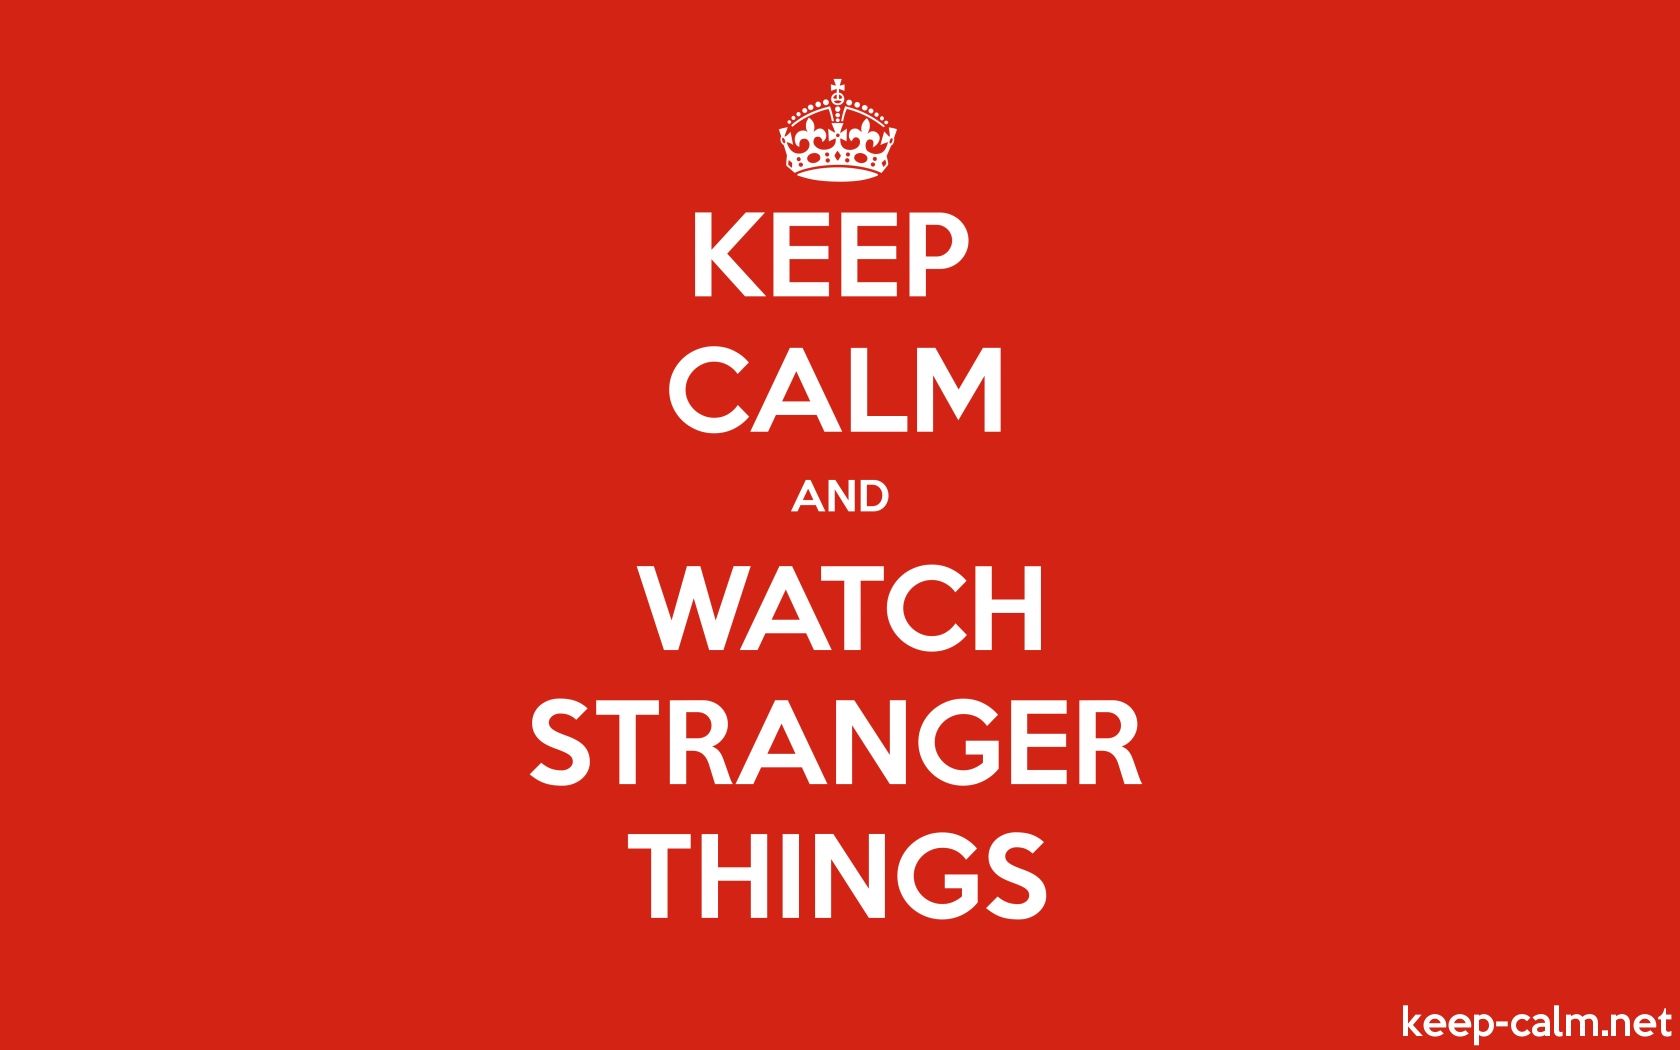 KEEP CALM AND WATCH STRANGER THINGS